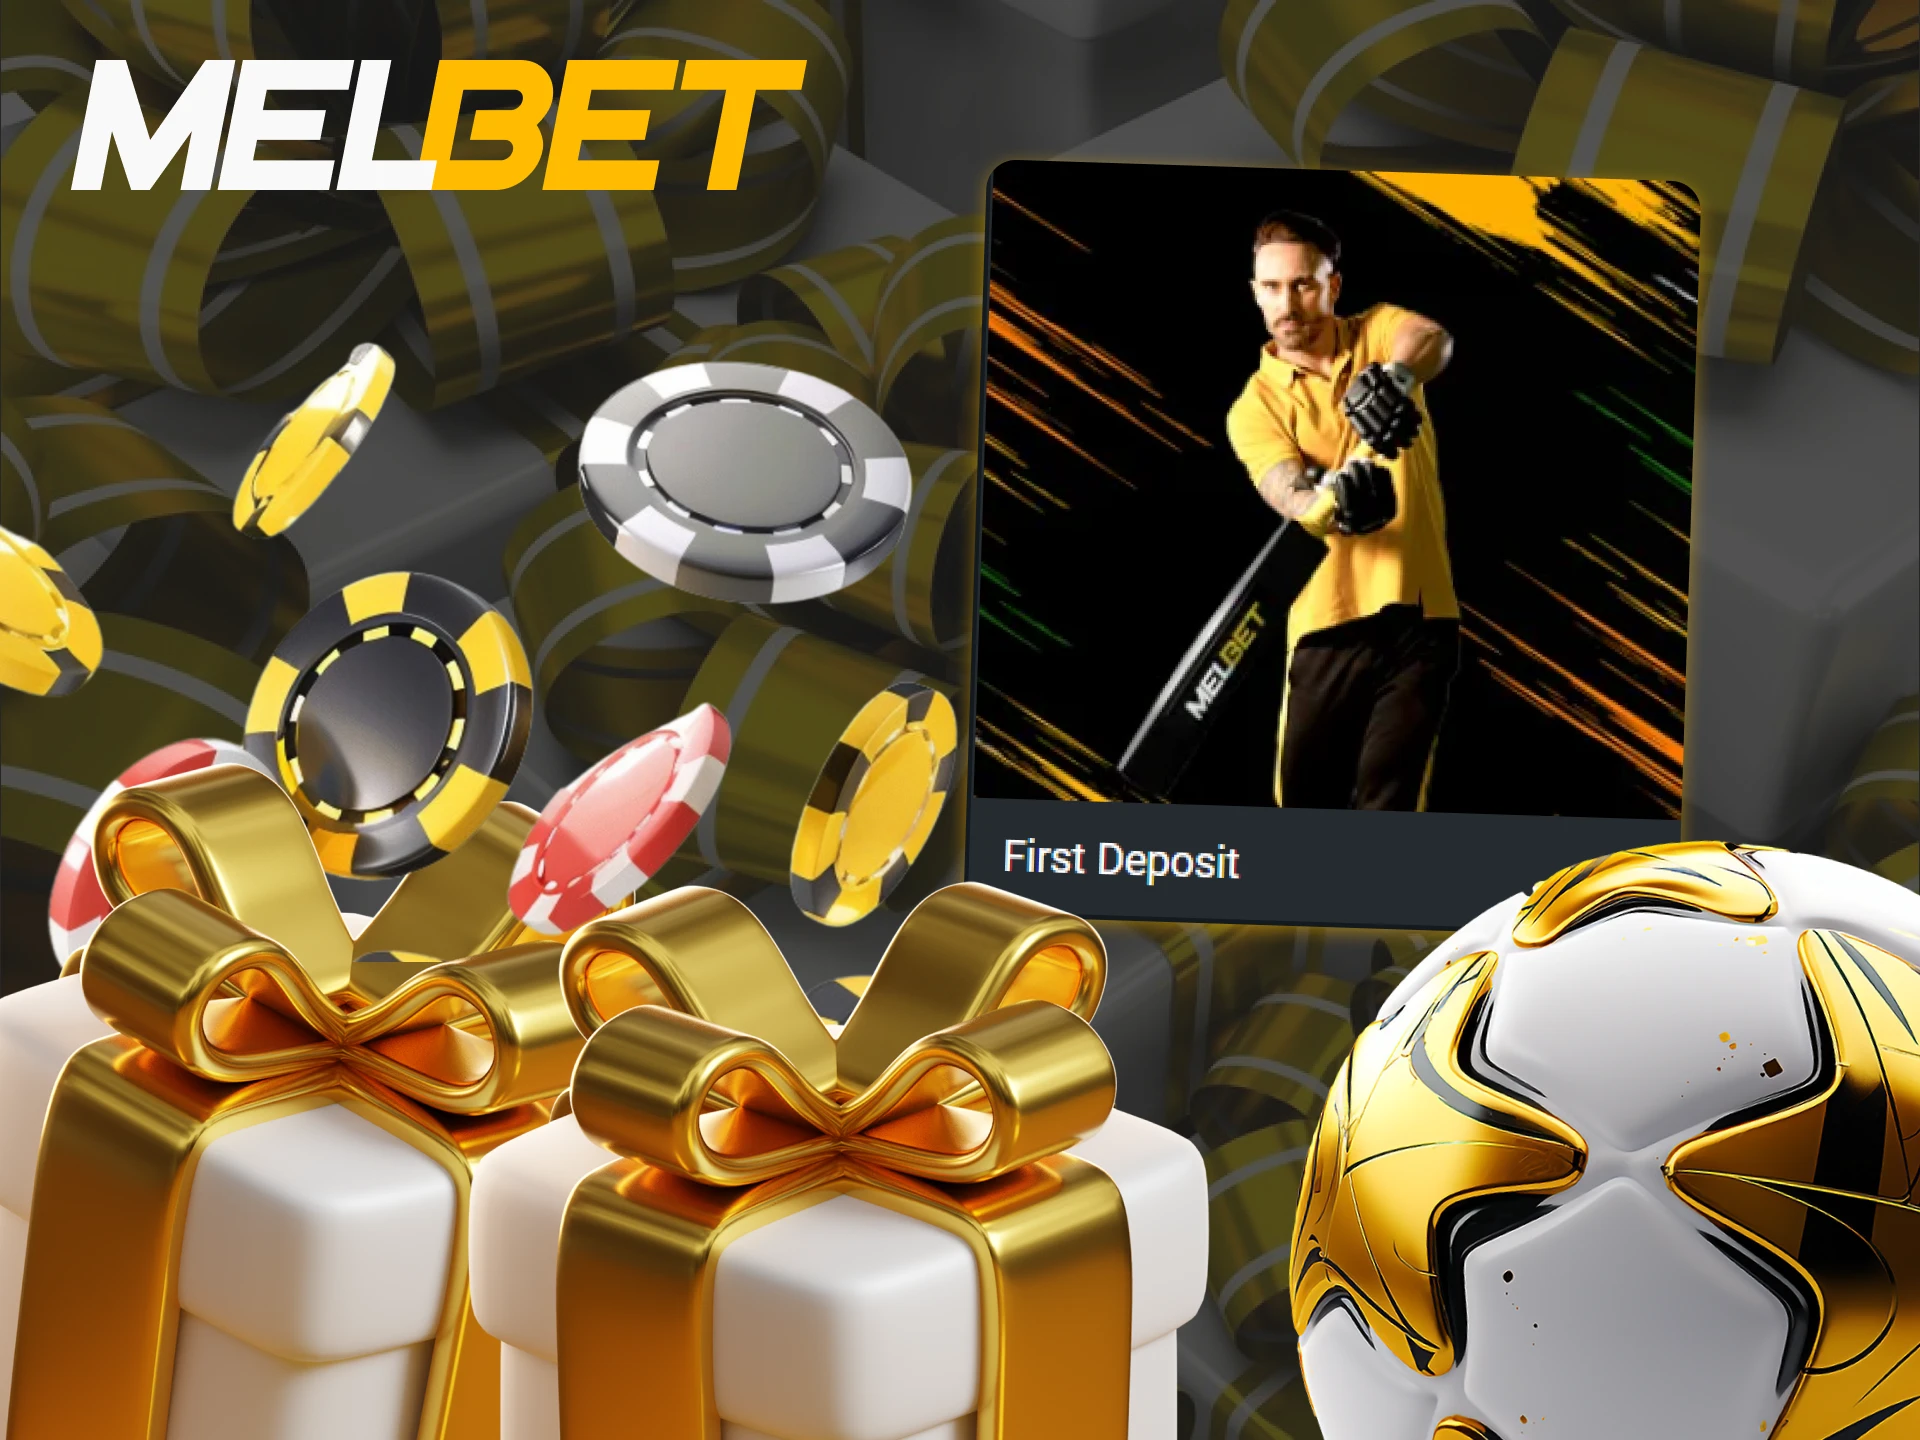 Get the Melbet welcome bonus to bet with more profit.